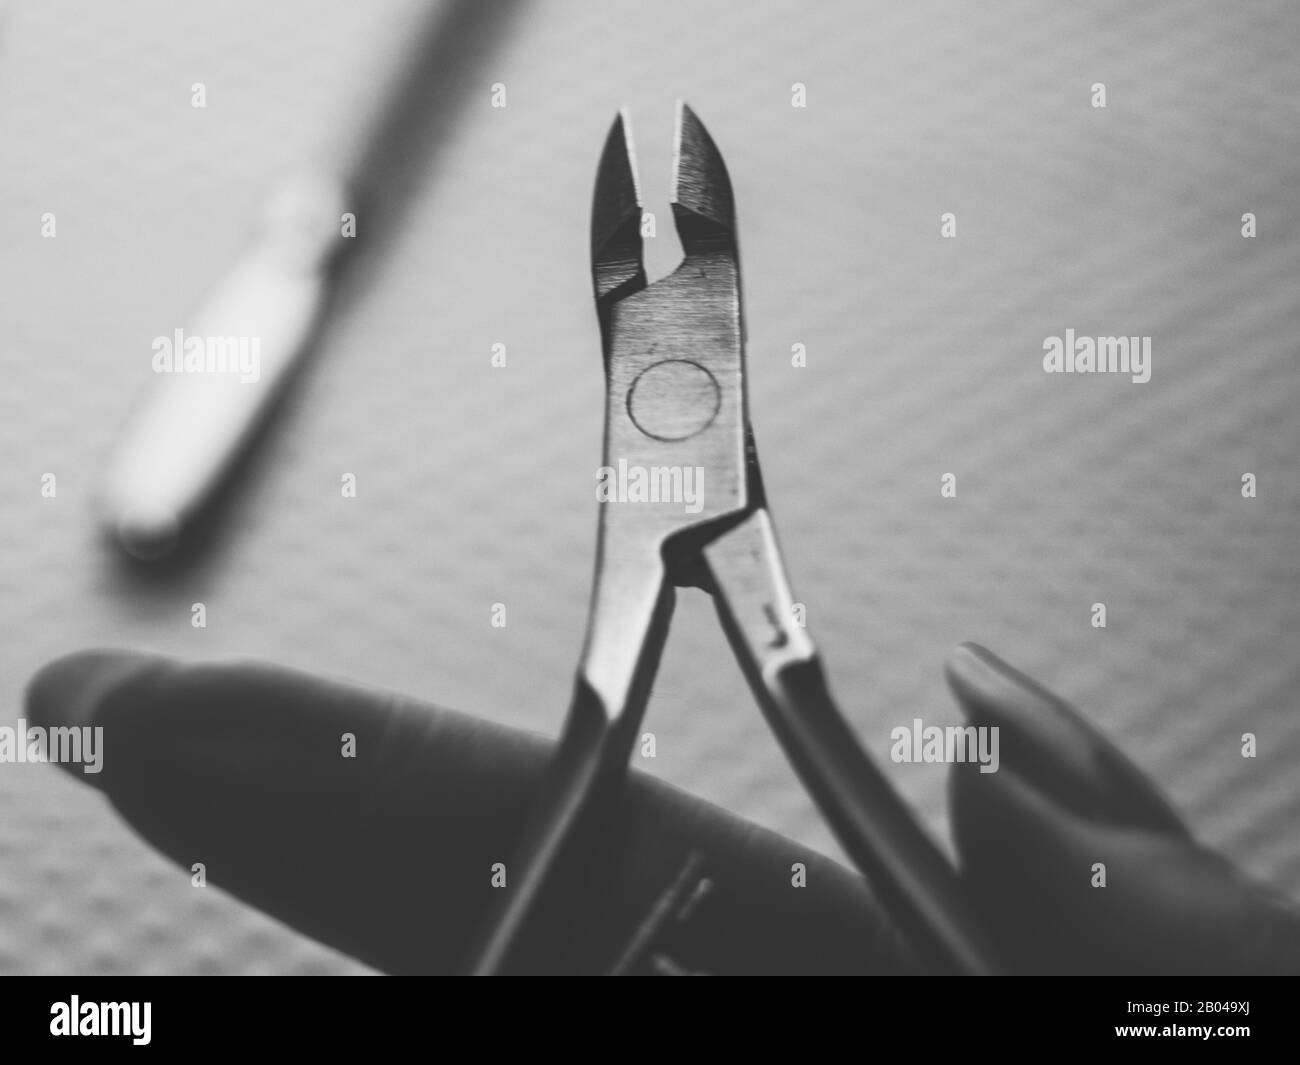 Nippers cuticle scissor in female fingers. Cuticle shovel on the blurred background. BW photo Stock Photo